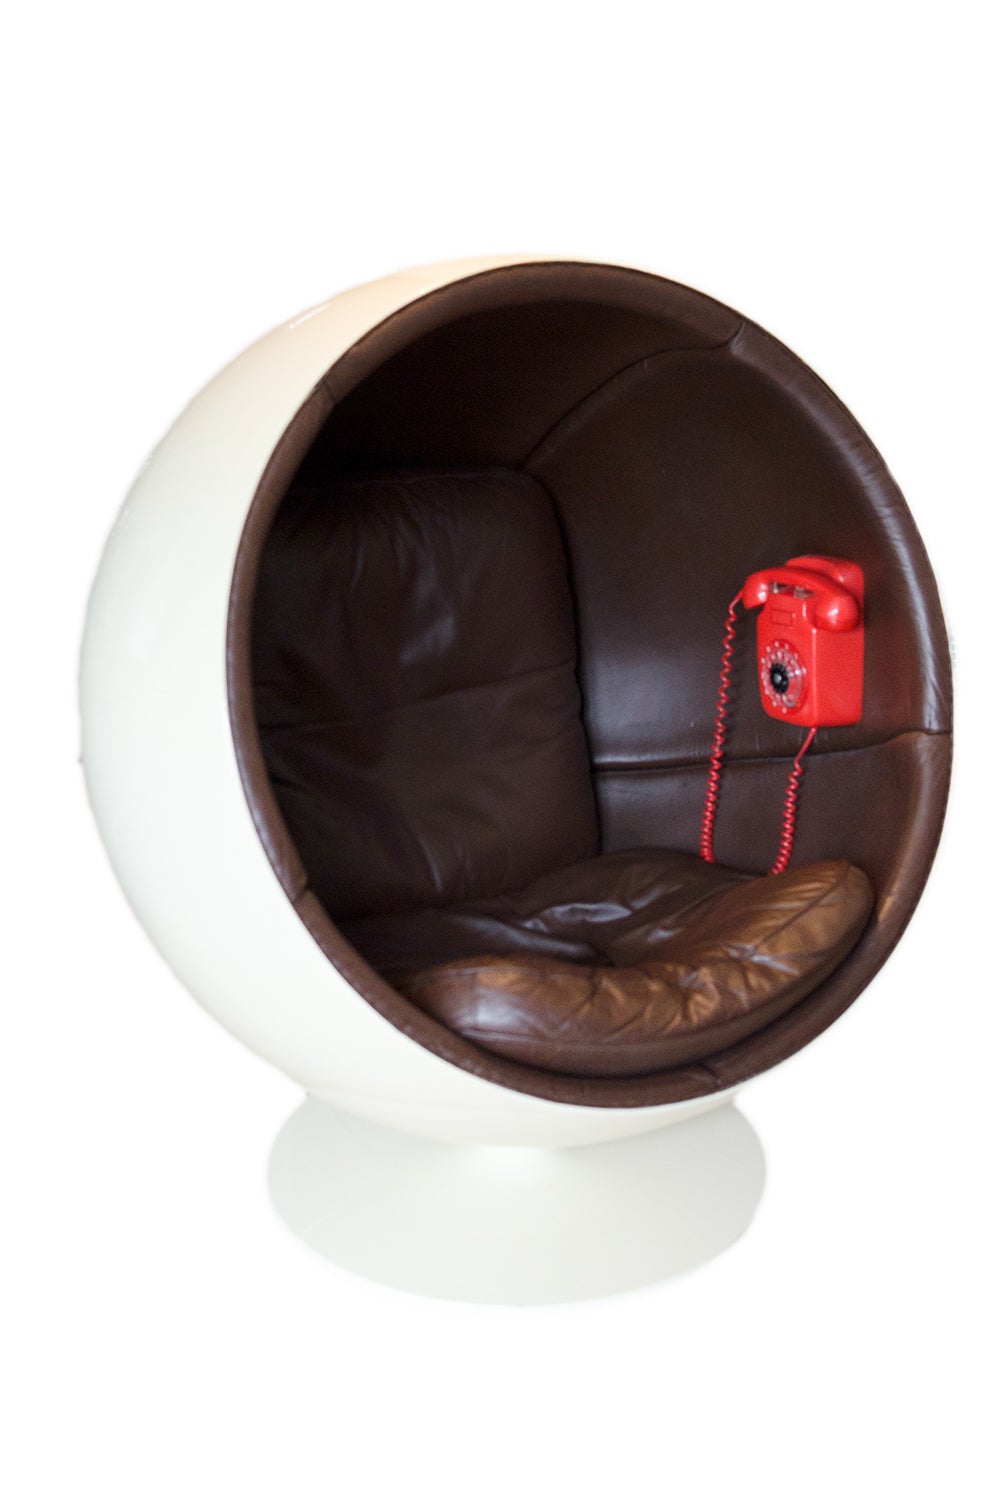 Extreme rare Ball chair by Eero Aarnio made by Asko. For Sale